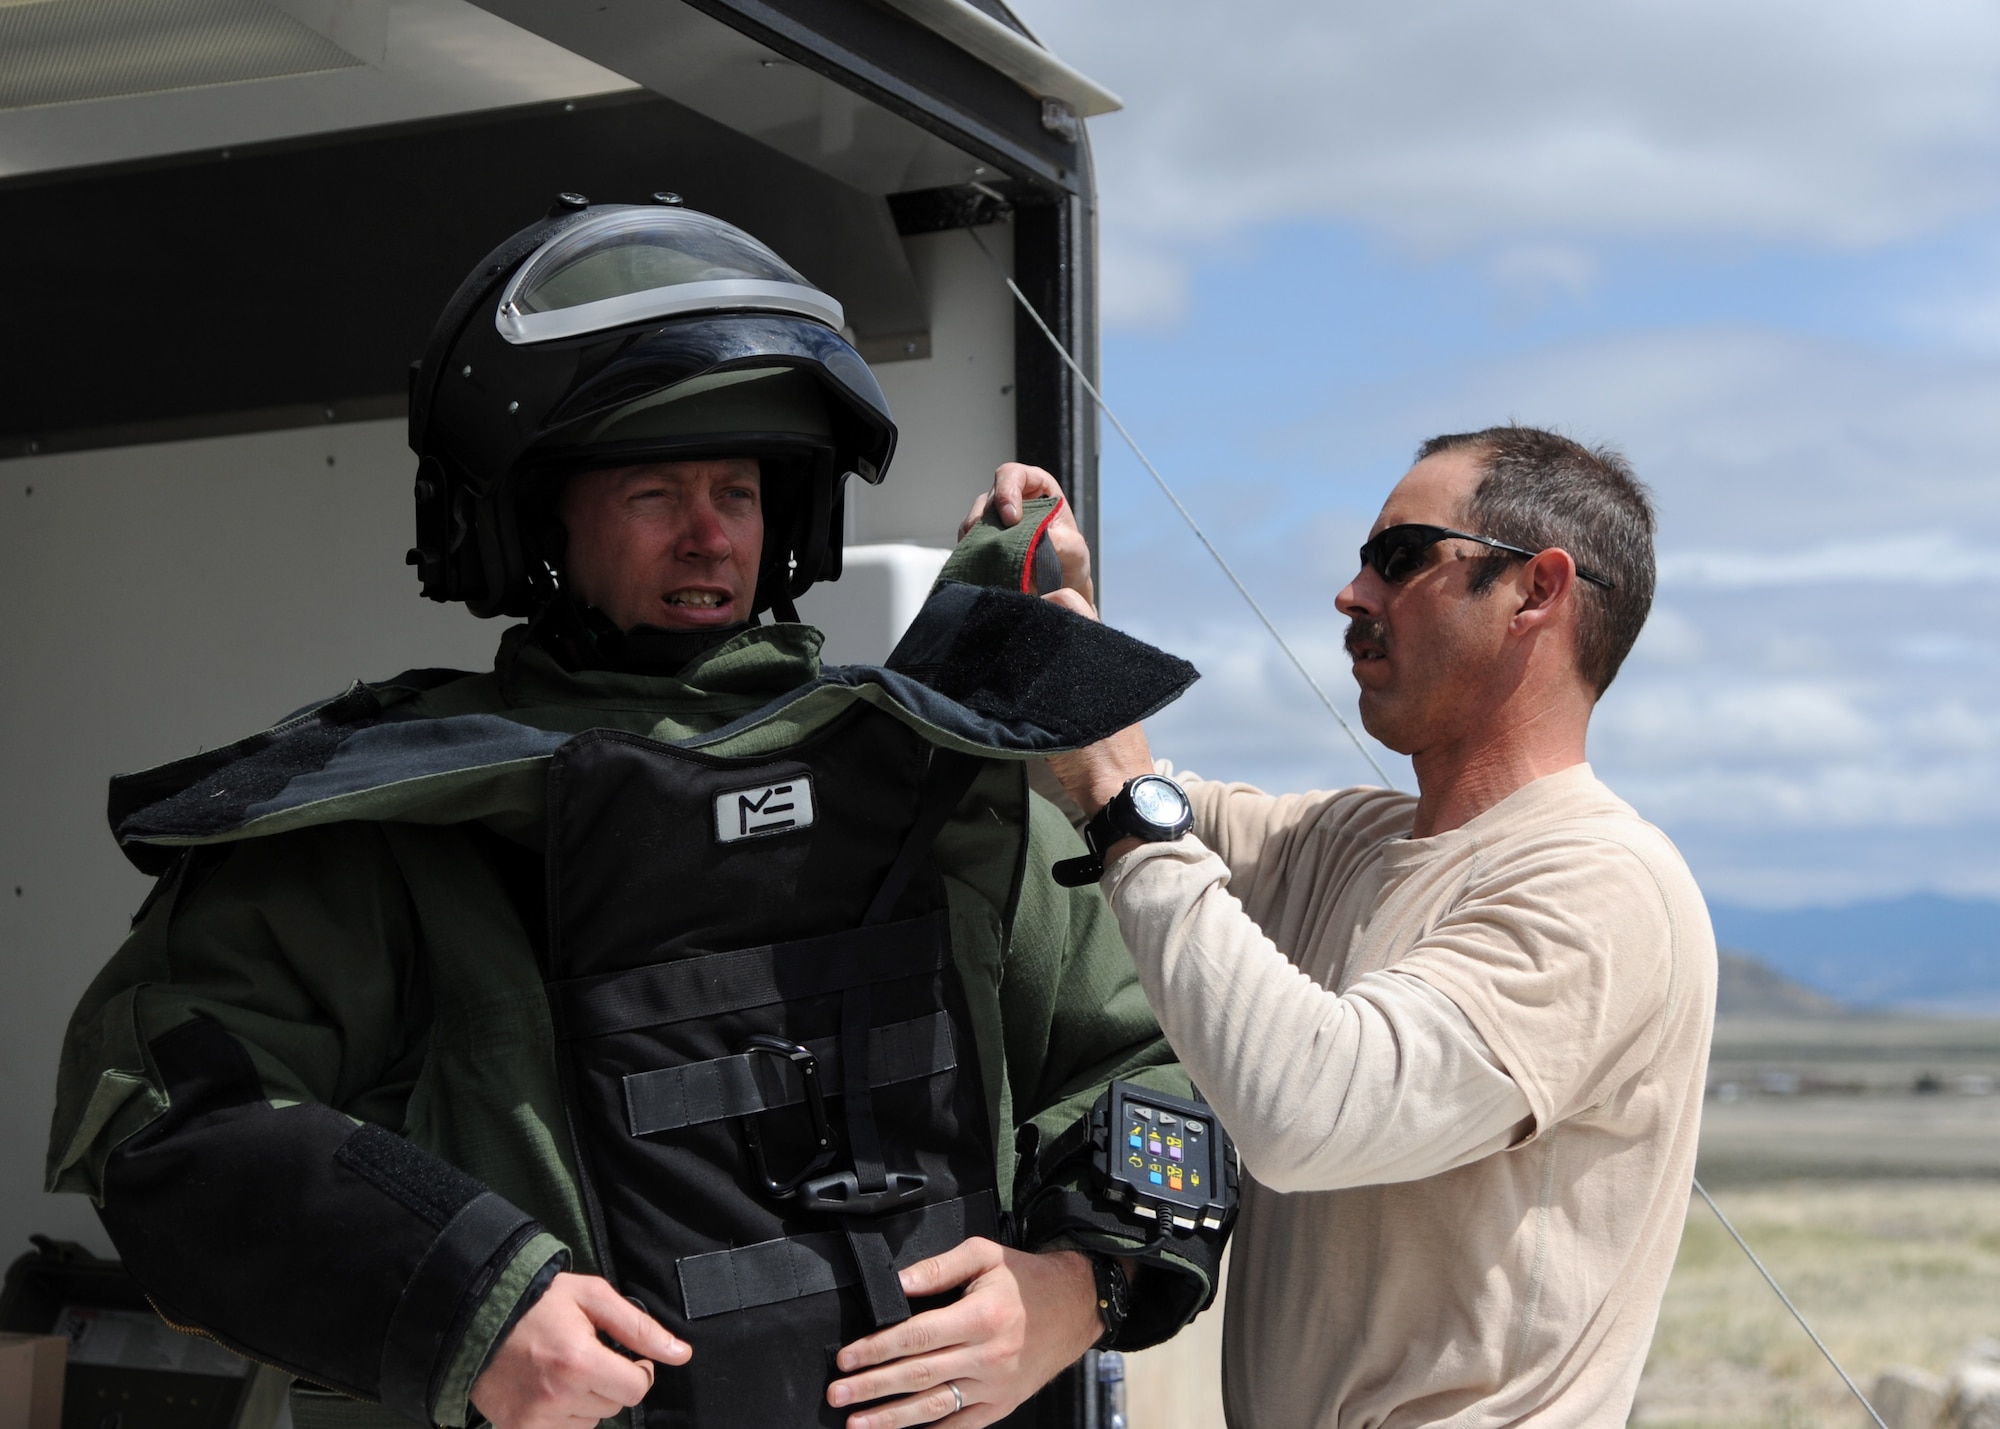 Tech. Sgt. Scott Lawson, 120th Airlift Wing Explosive Ordnance Disposal technician, gets dressed in the Explosive Ordinance Disposal-9 bomb suit. The EOD teams perform their training at Ft. Harrison in Helena, Mont., because it opens up more options for them to practice and utilize their supplies. (U.S. Air Force photo/ Airman 1st Class Joshua Smoot)